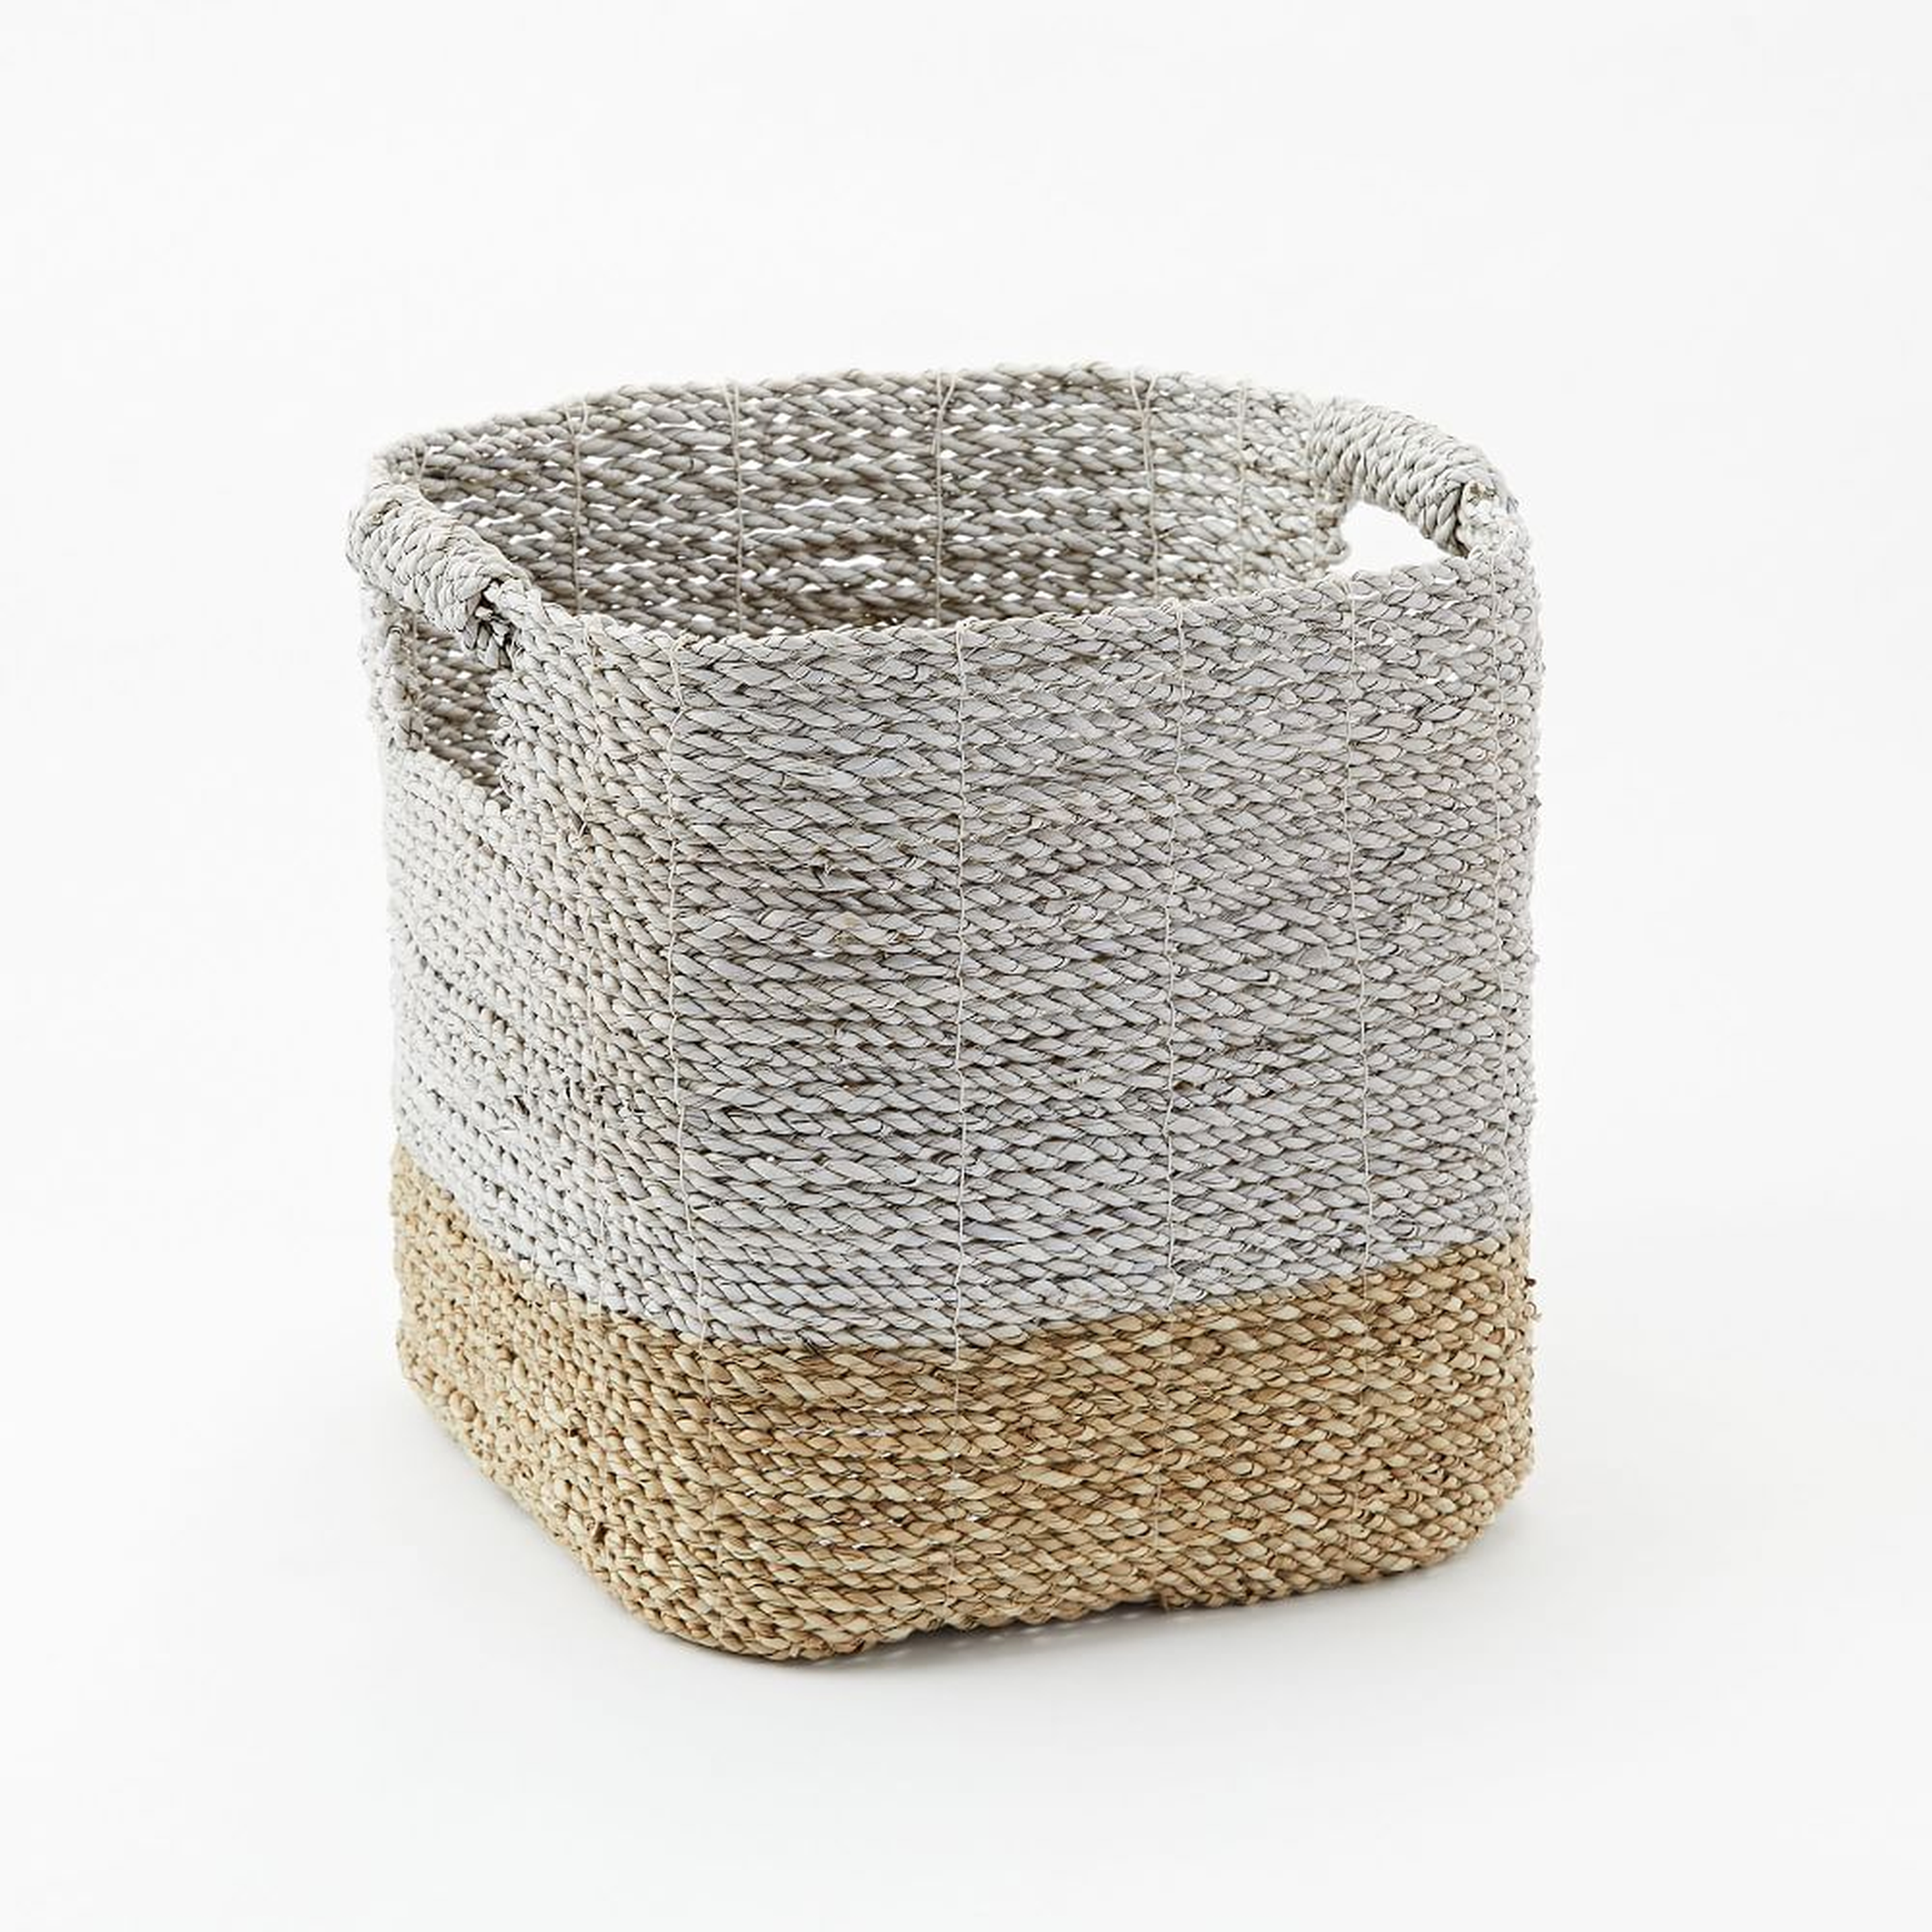 Two-Tone Woven Baskets, Natural/White, Large Utility Basket, 12"W x 12"H - West Elm